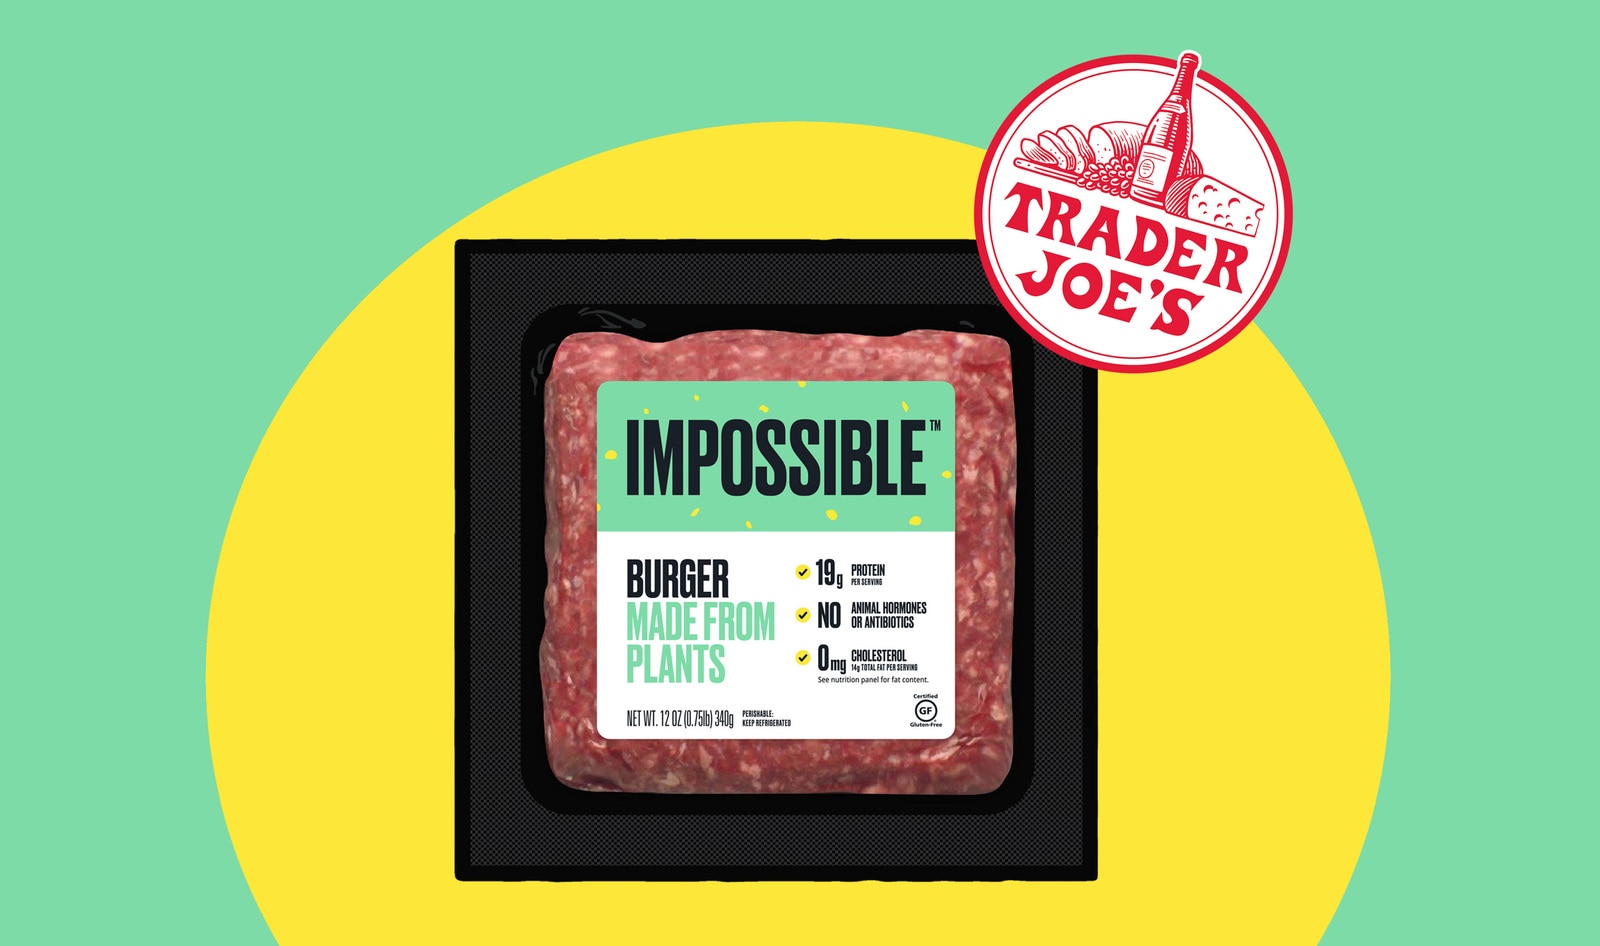 Trader Joe’s Now Sells Impossible Burgers